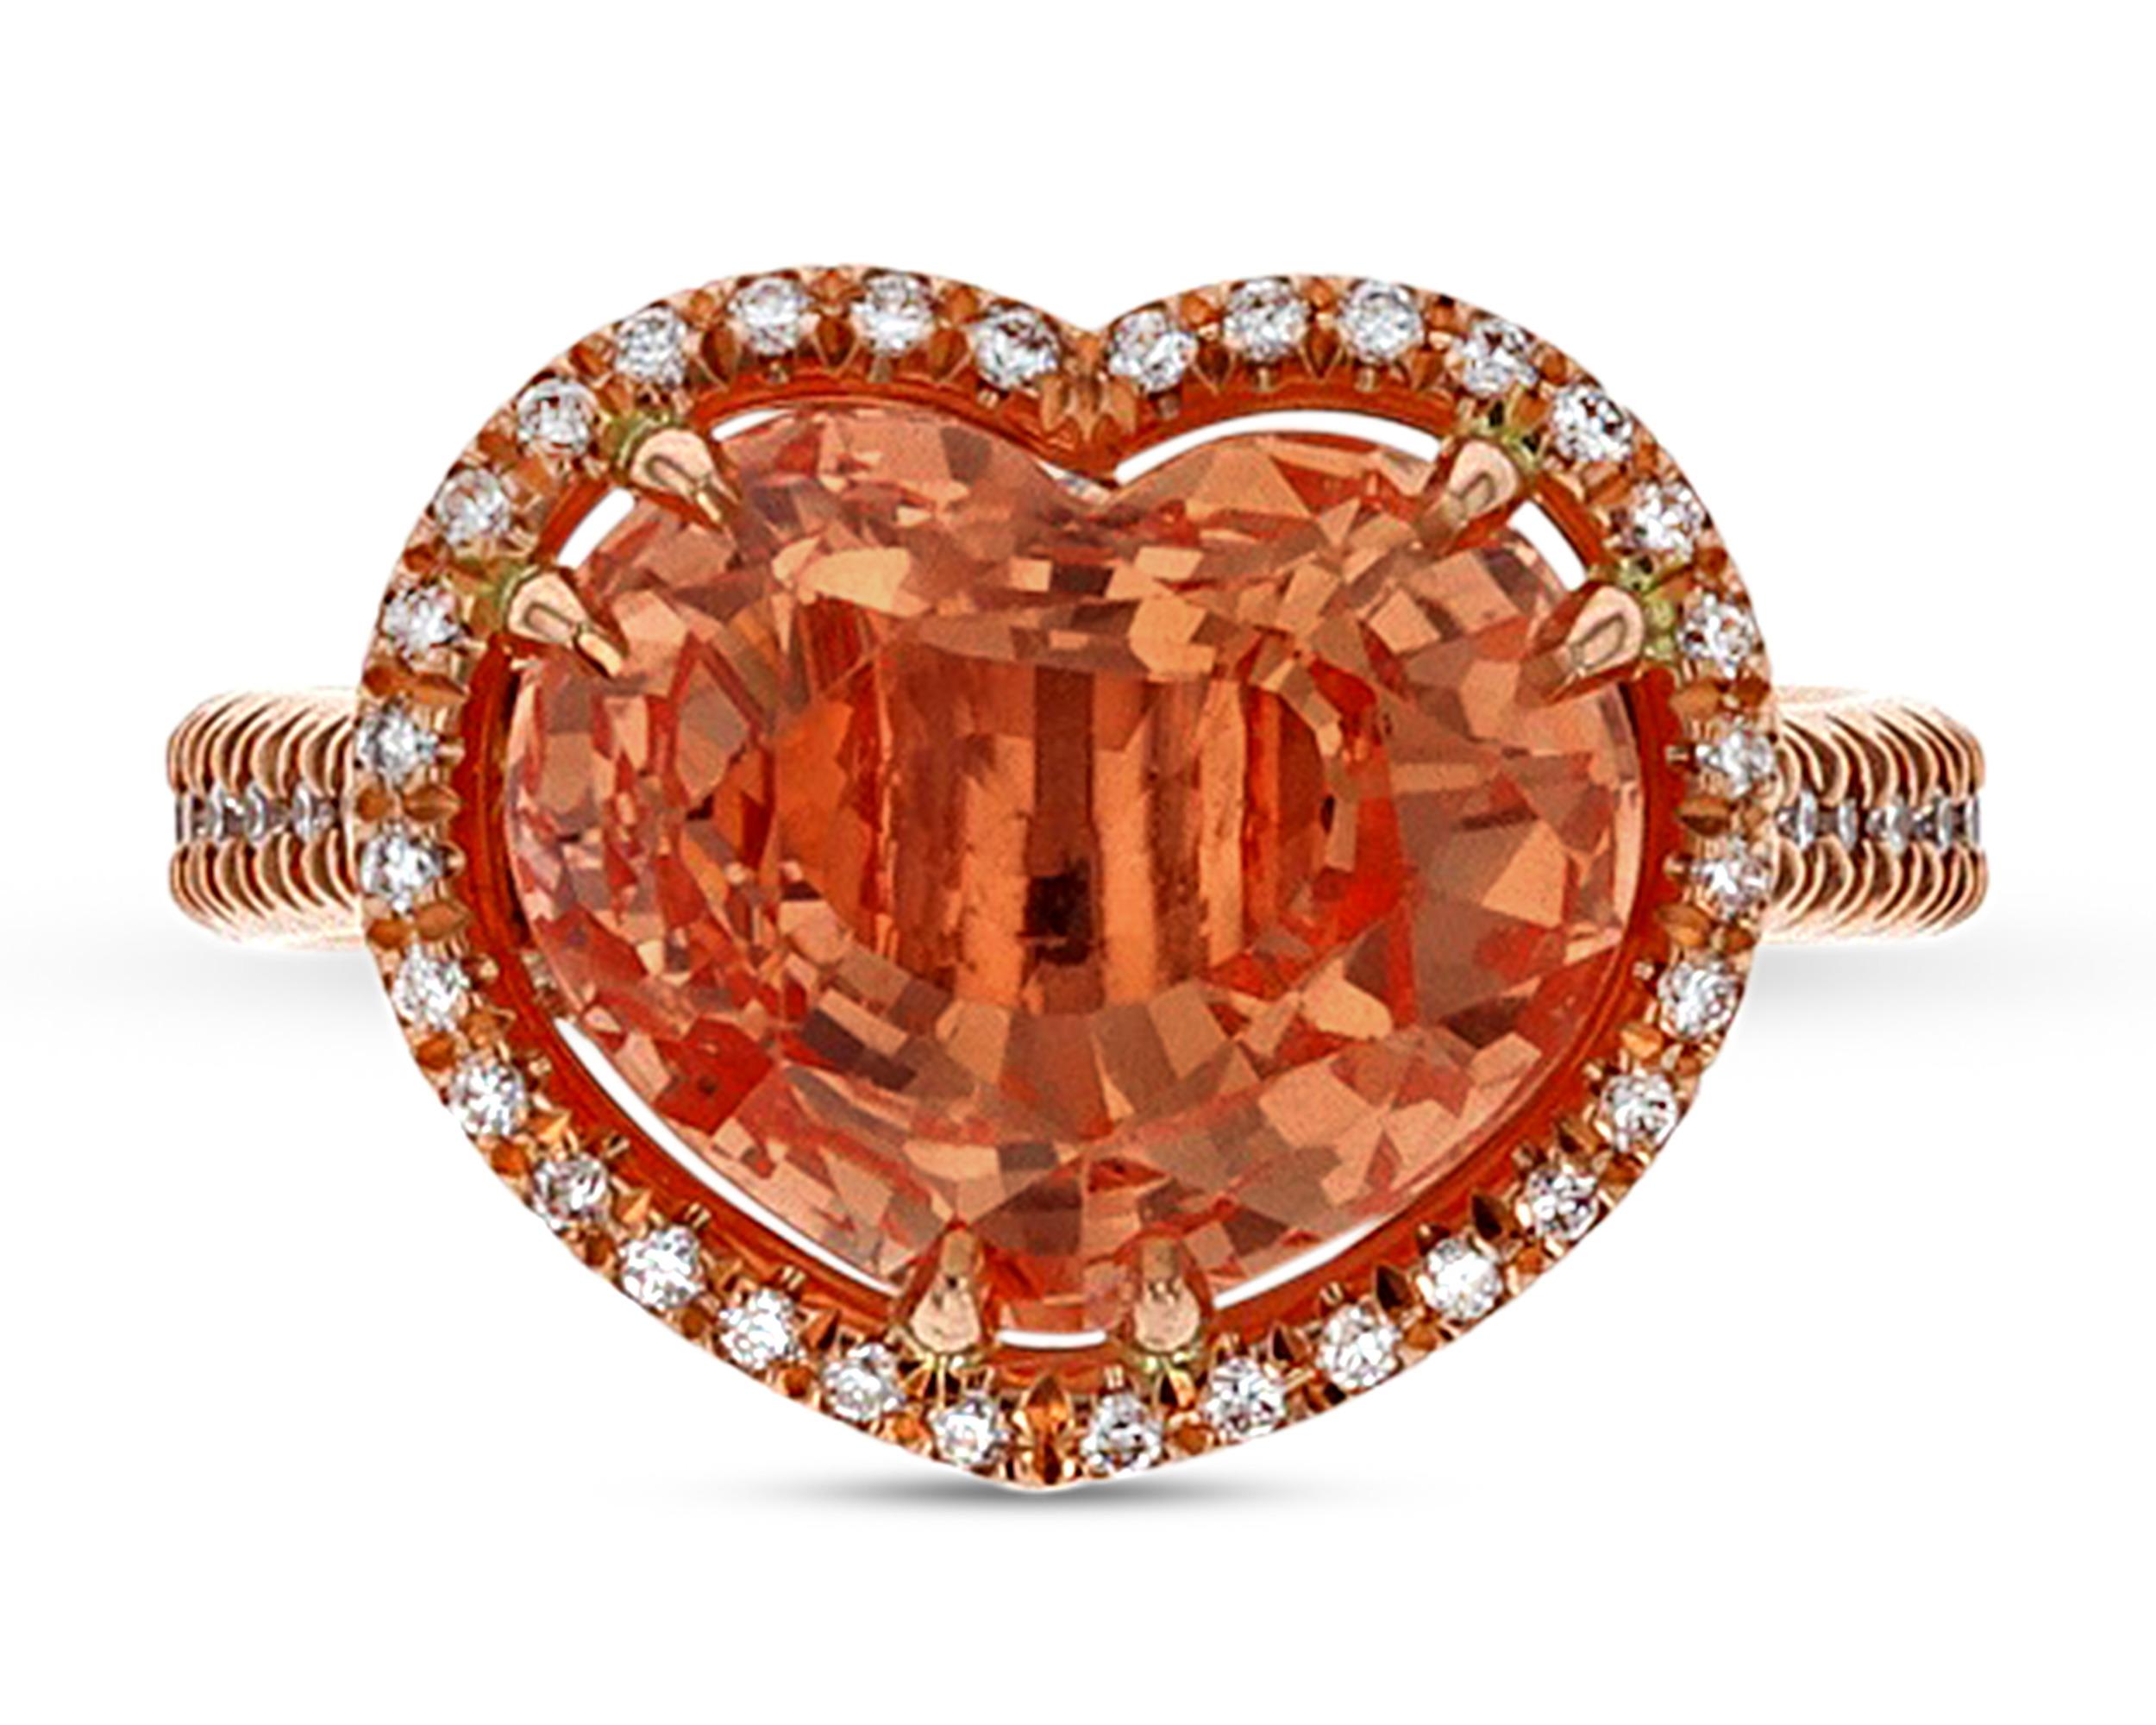 Modern Heart-Shaped Padparadscha Sapphire Ring, 5.95 Carats For Sale